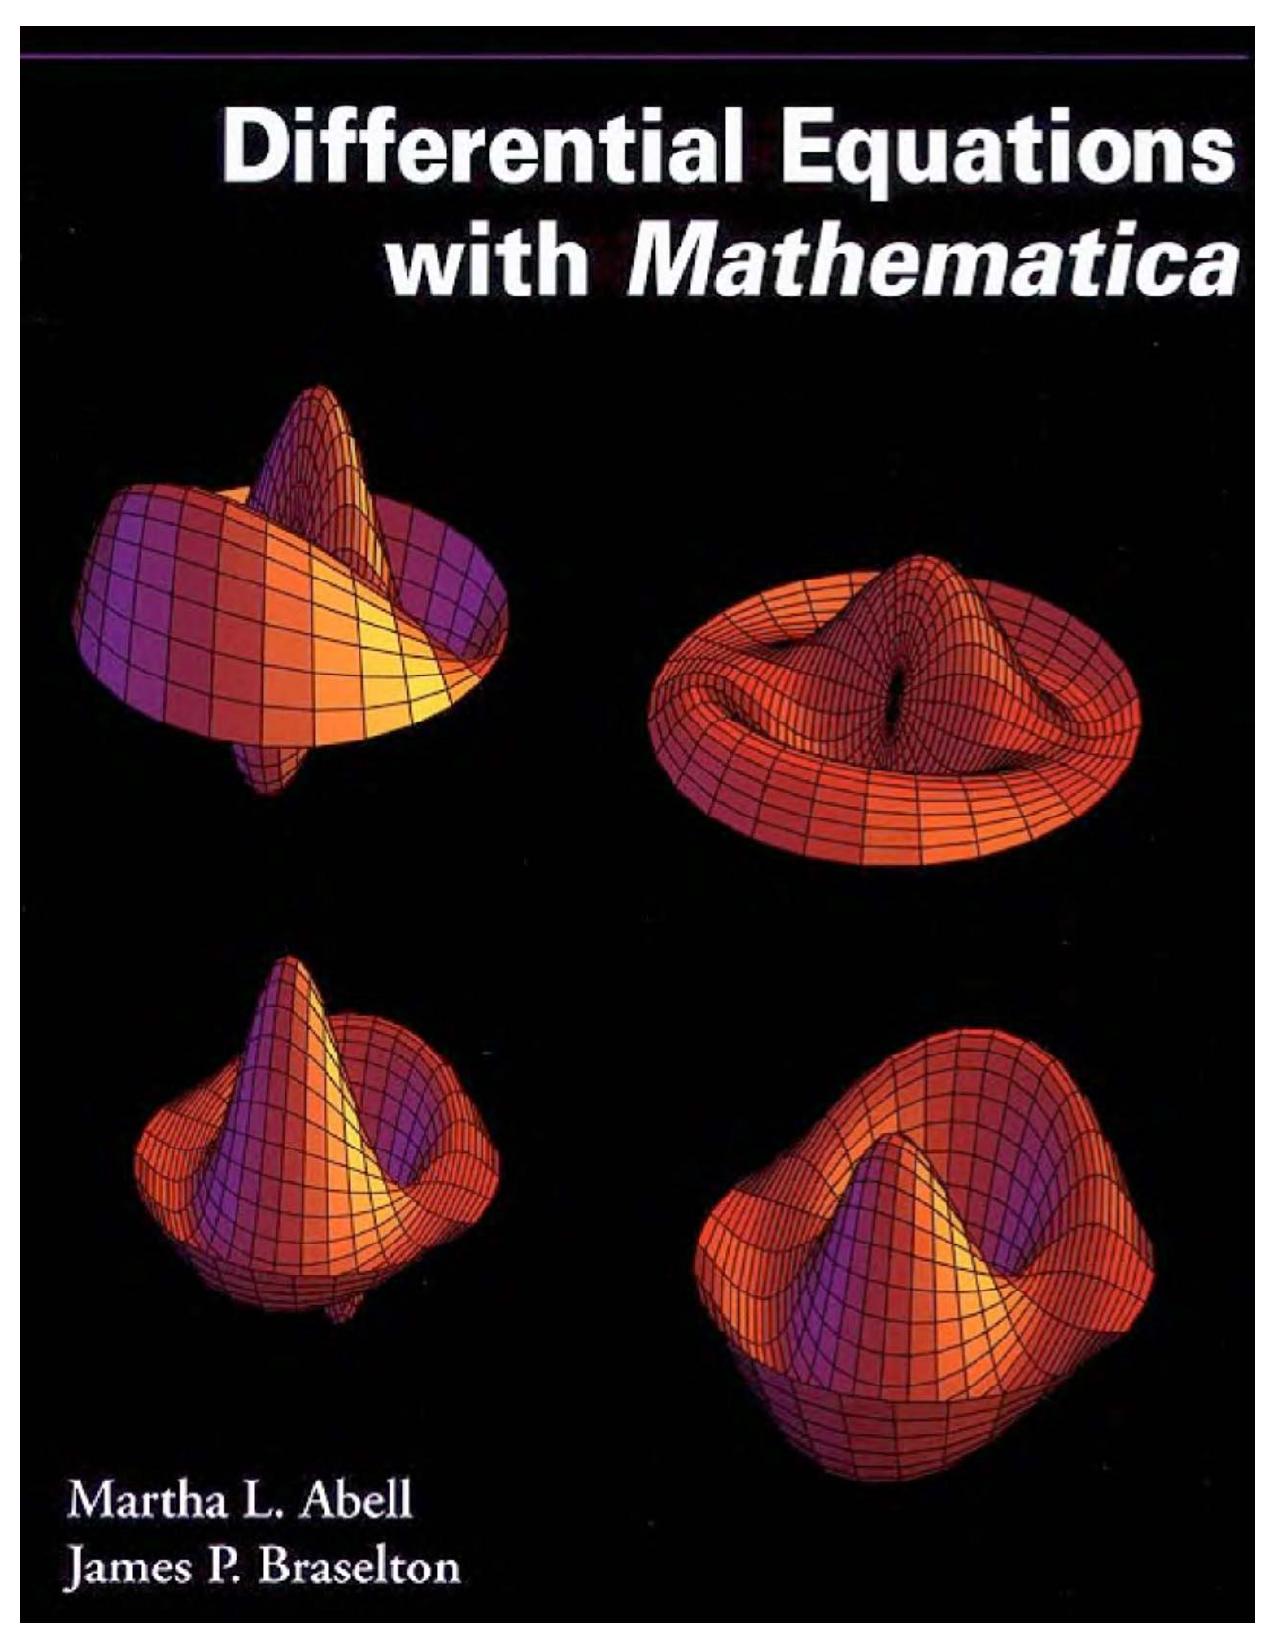 Differential Equations with Mathematica® - 1993